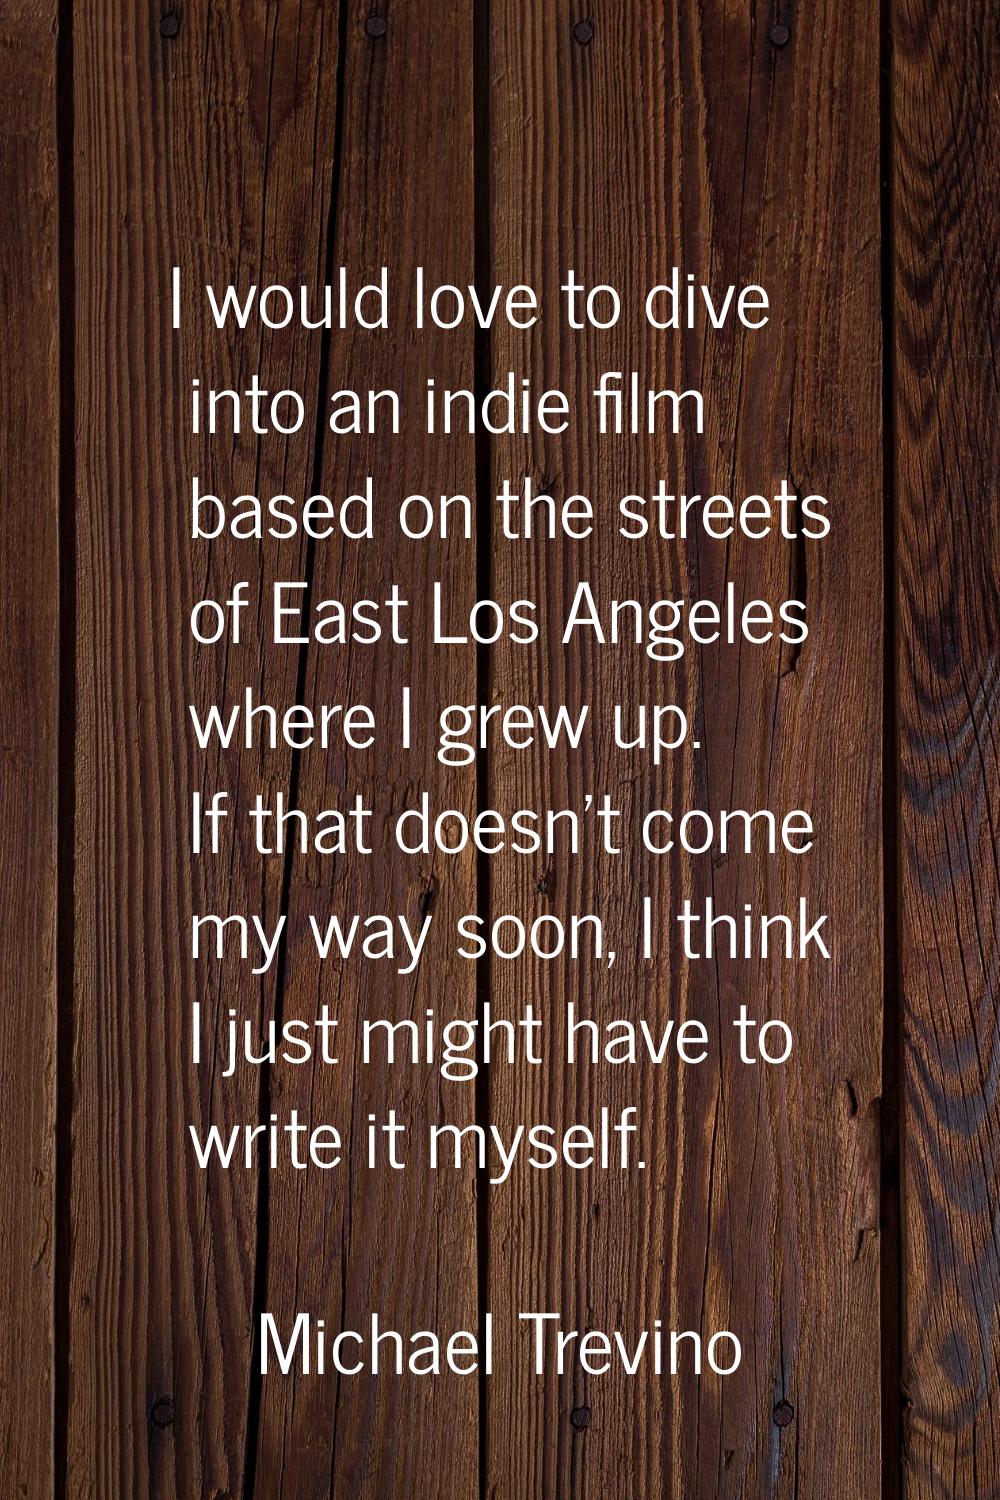 I would love to dive into an indie film based on the streets of East Los Angeles where I grew up. I